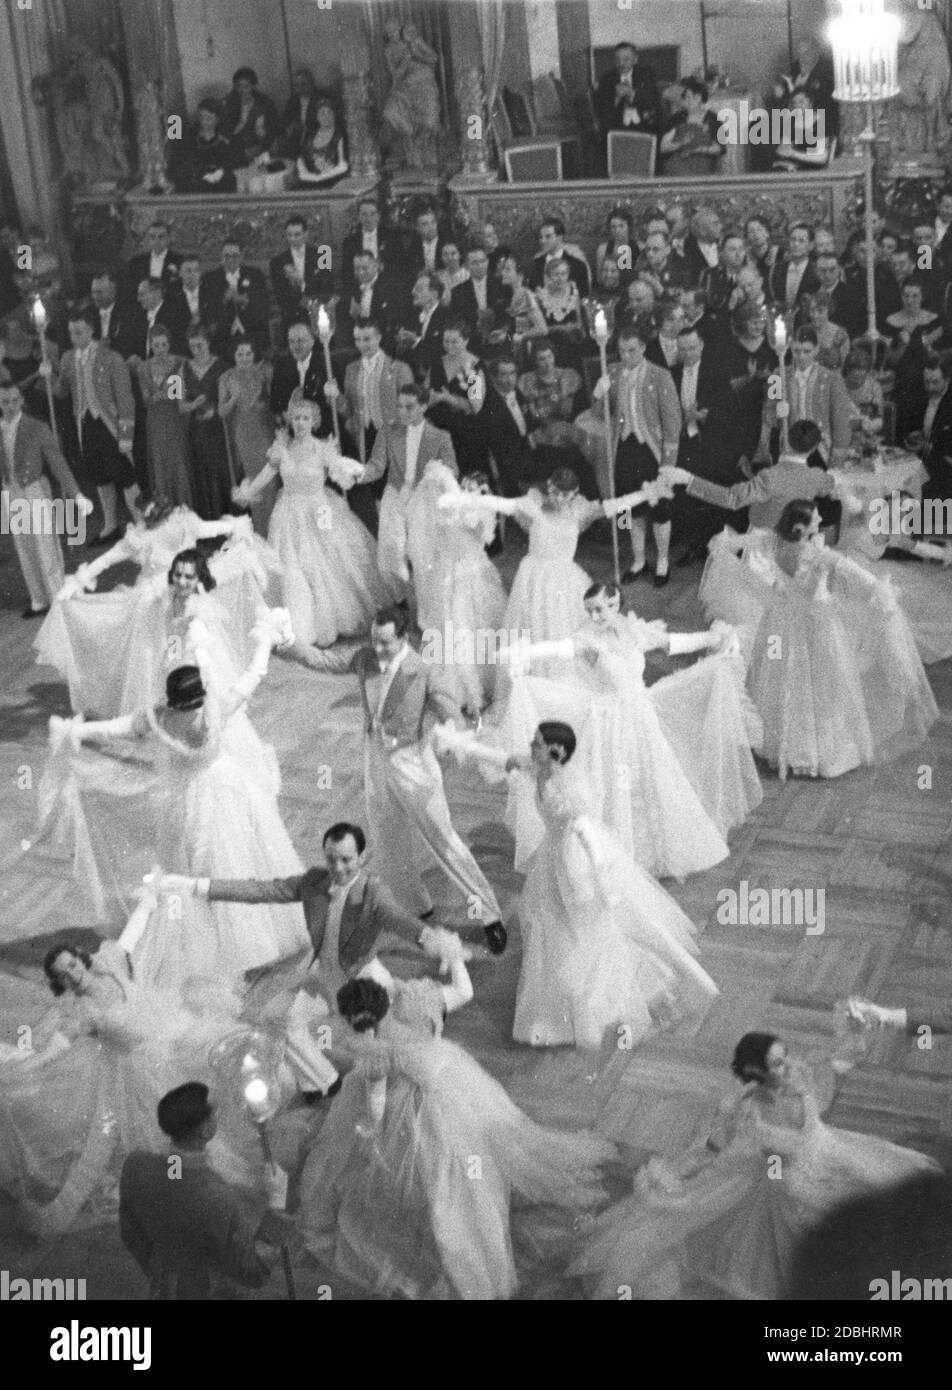 On January 12, 1936, the Opera Ball of the Prussian State Theater took place at the Staatsoper Unter den Linden. The photo shows a performance of the State Opera Ballet. Stock Photo